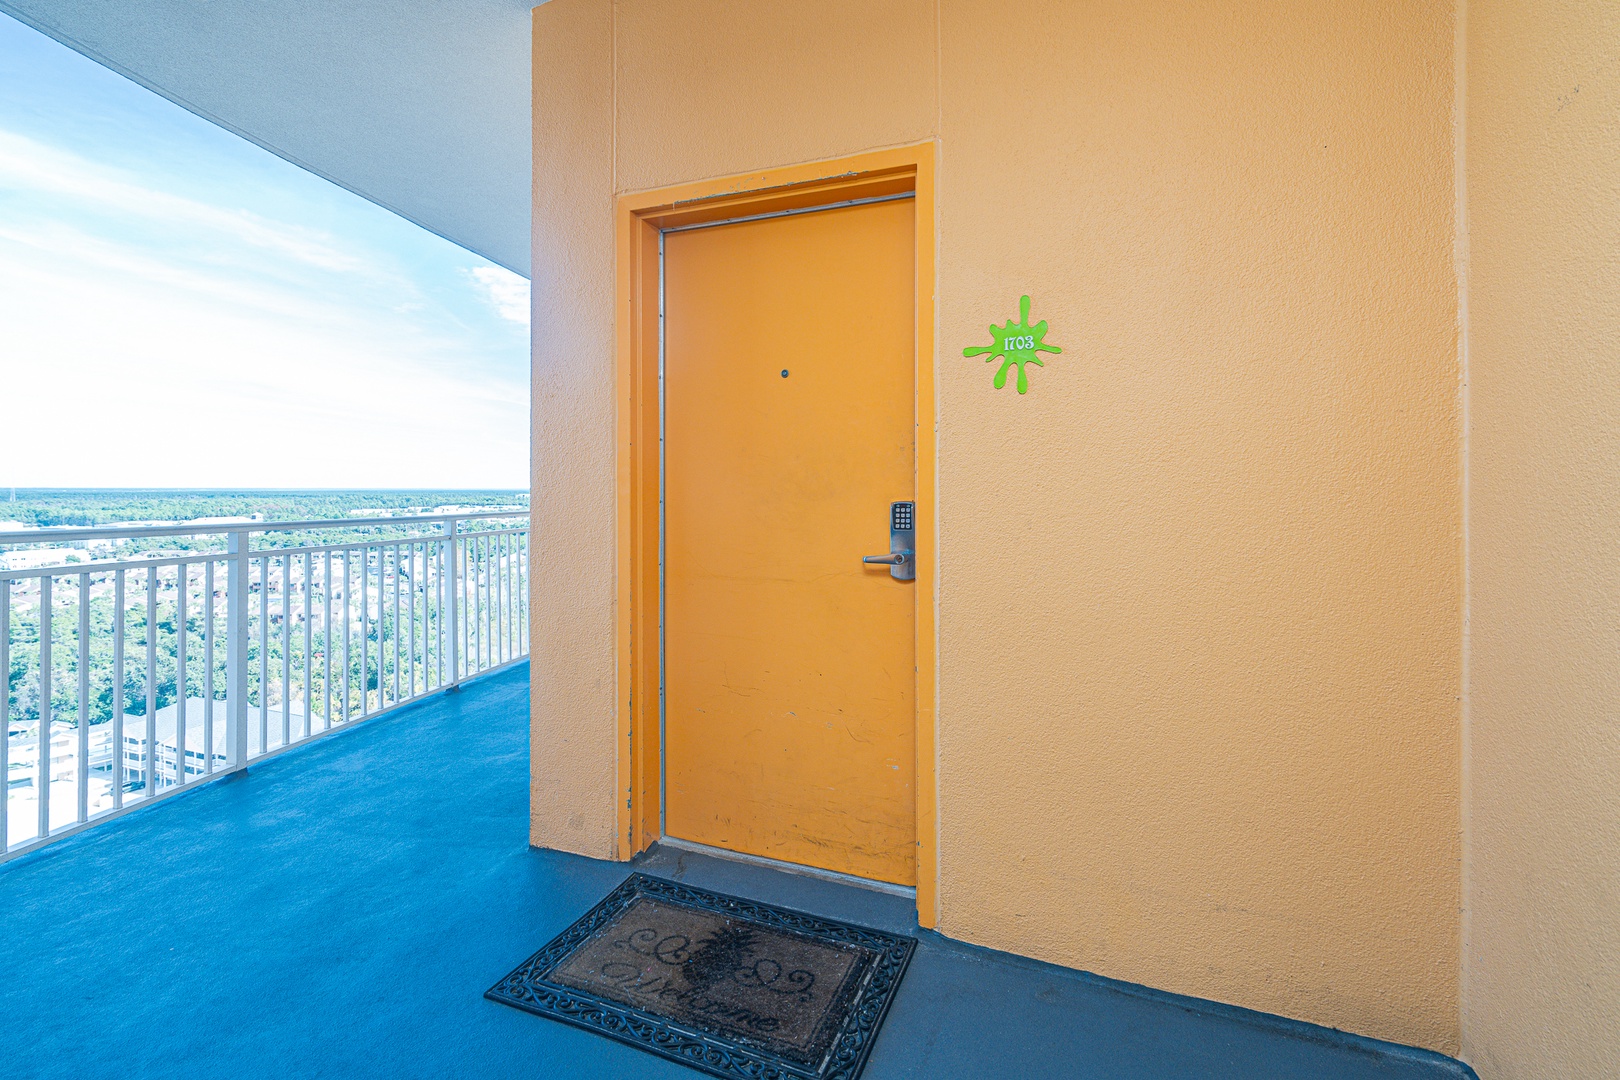 This condo is equipped with keyless entry for guest convenience